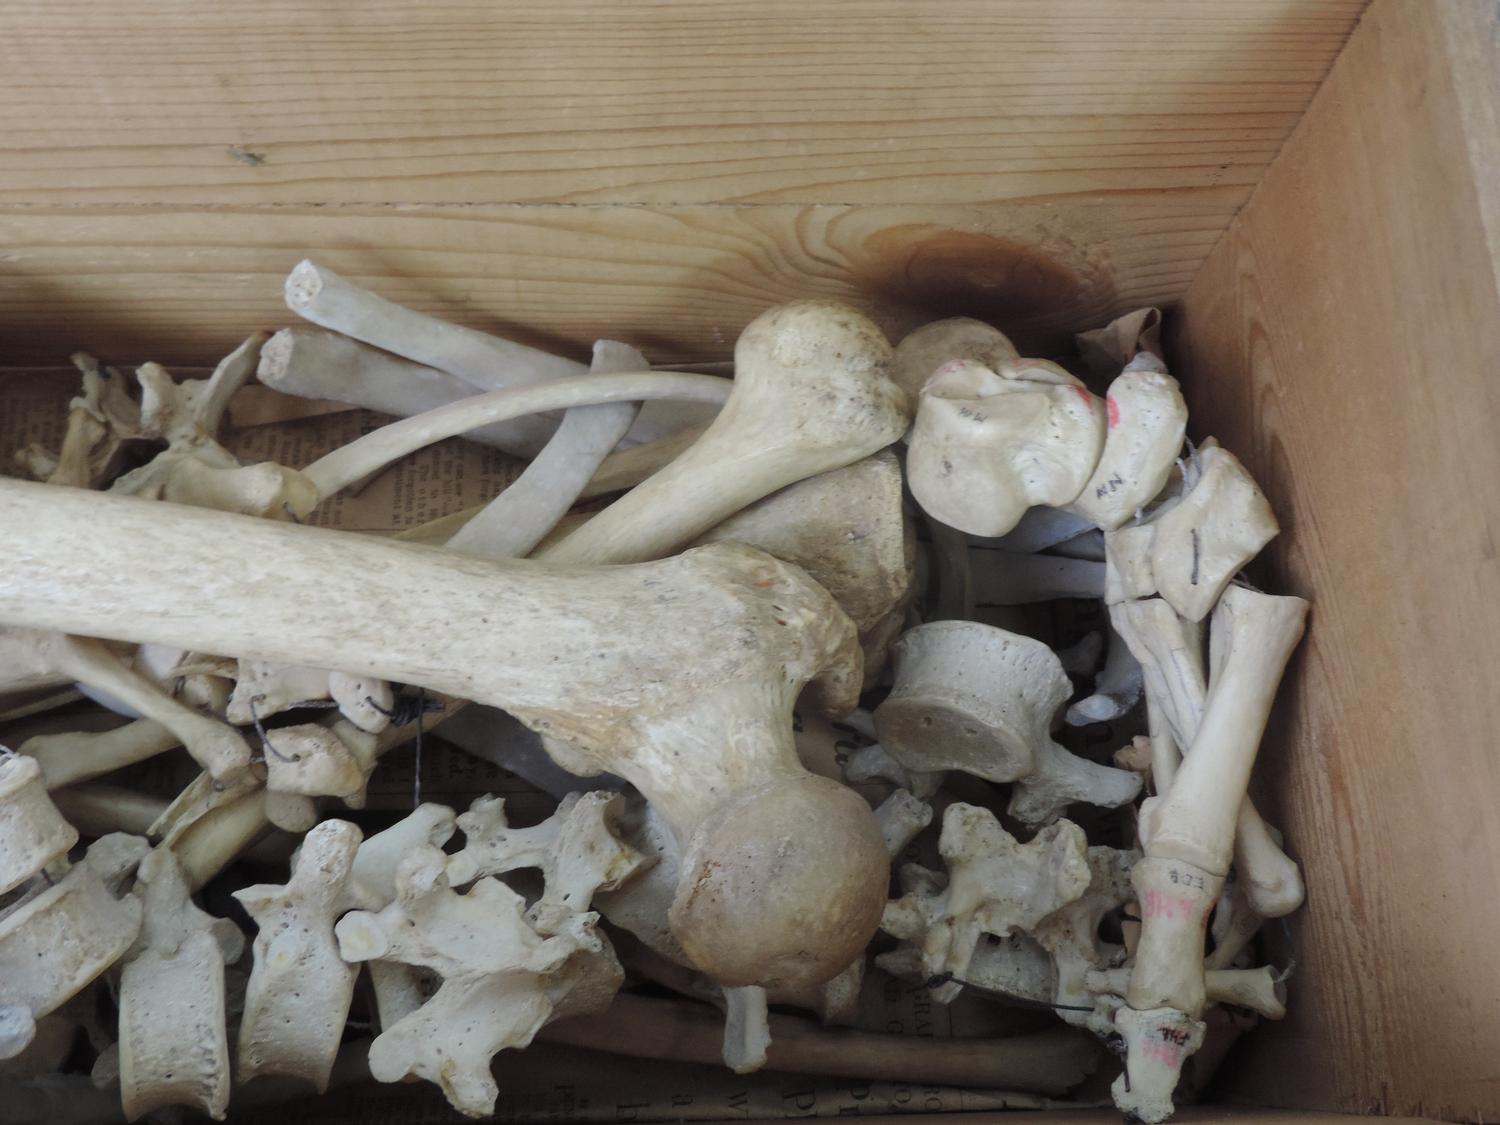 Wooden Box and Contents - Part Human Skeleton - Image 4 of 4